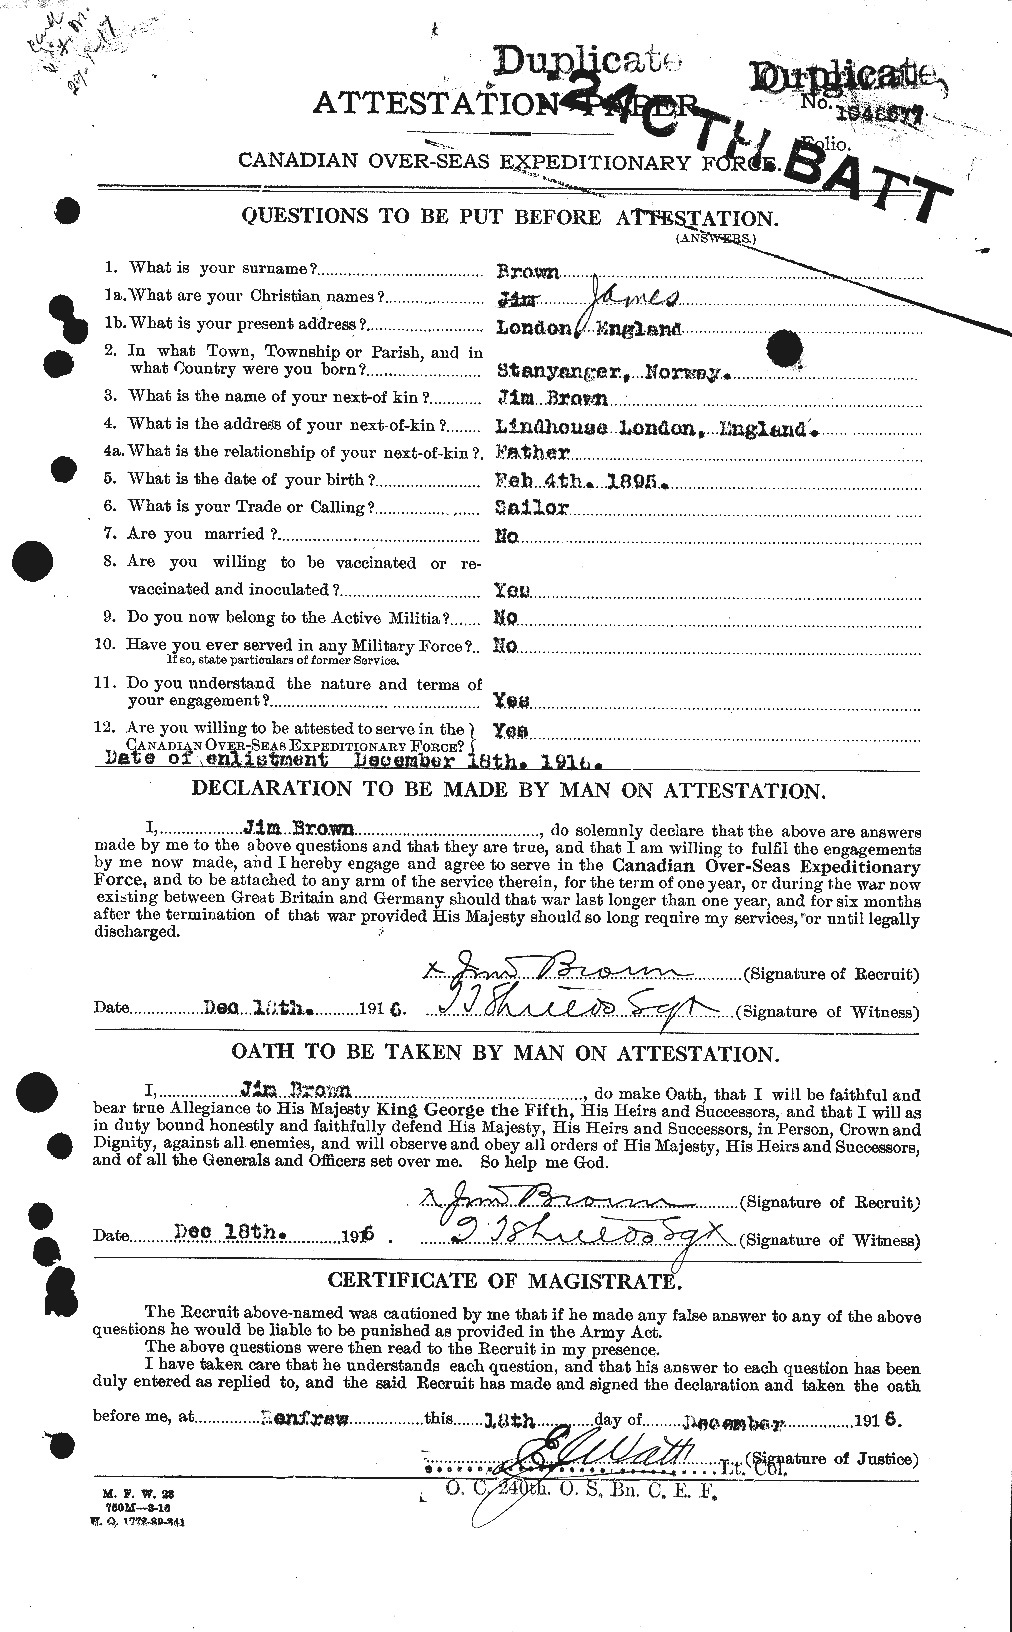 Personnel Records of the First World War - CEF 265766a